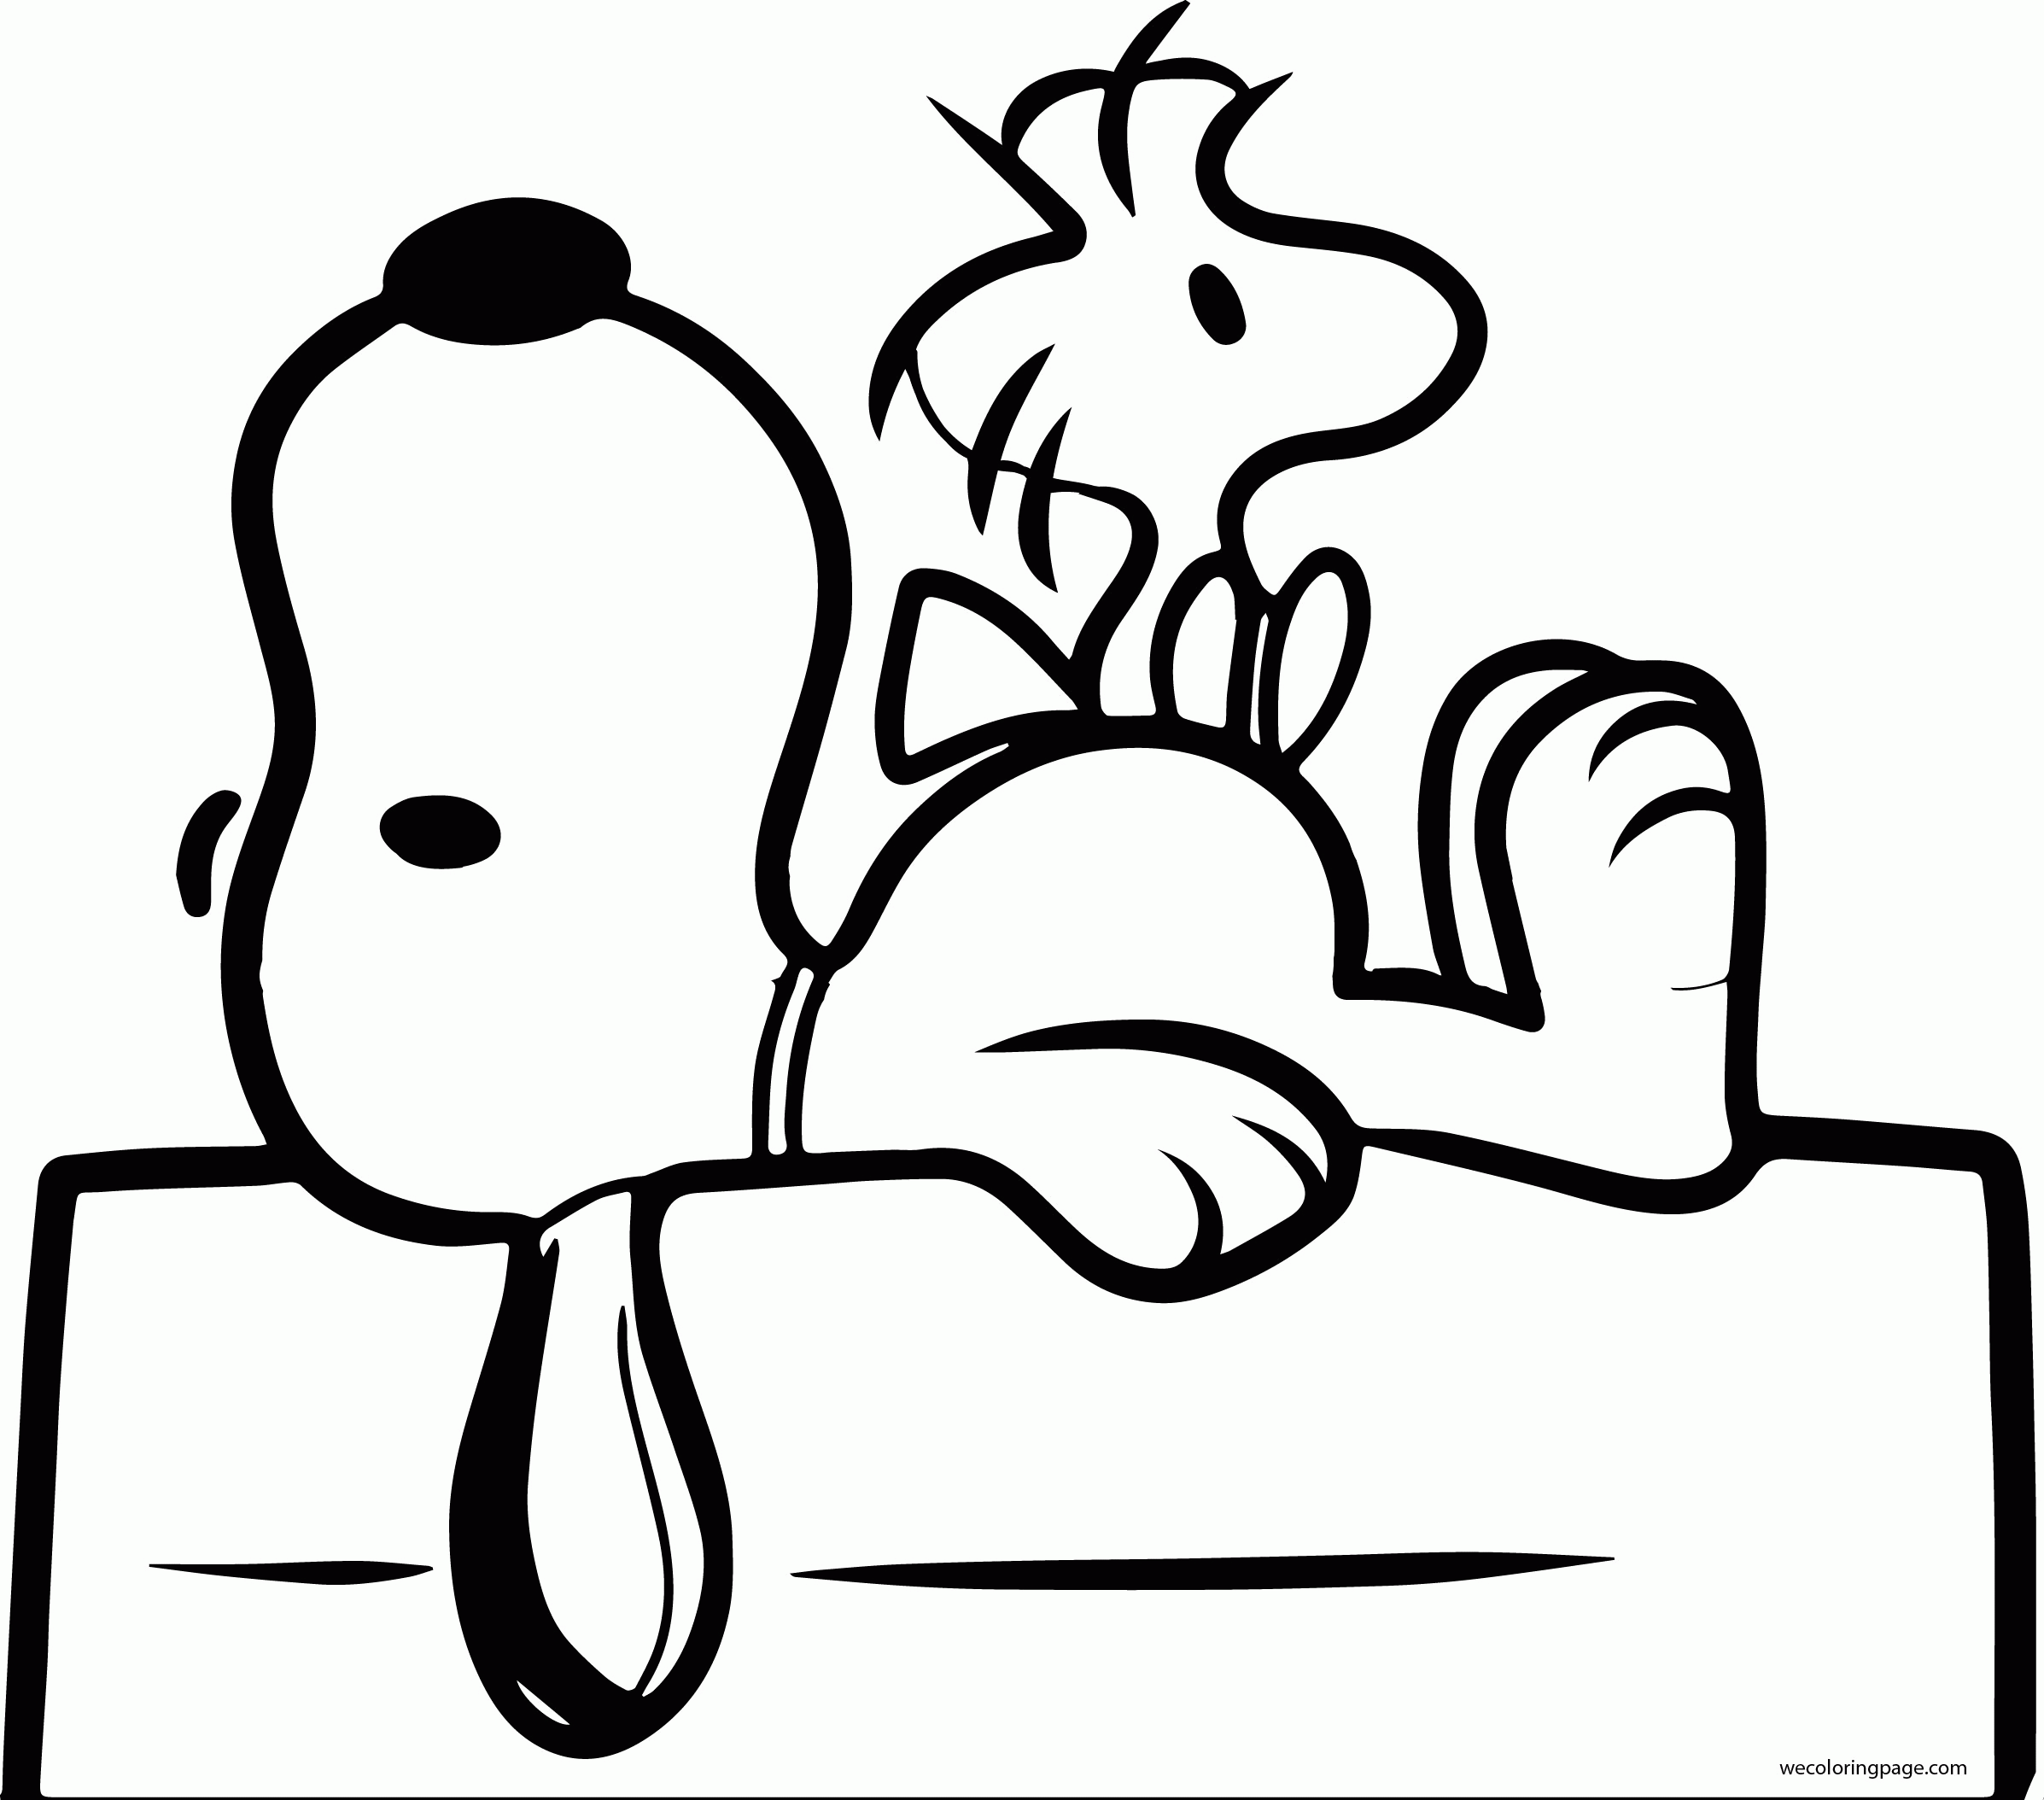 Perfect_snoopy And Woodstock_1_coloring_page | Wecoloringpage